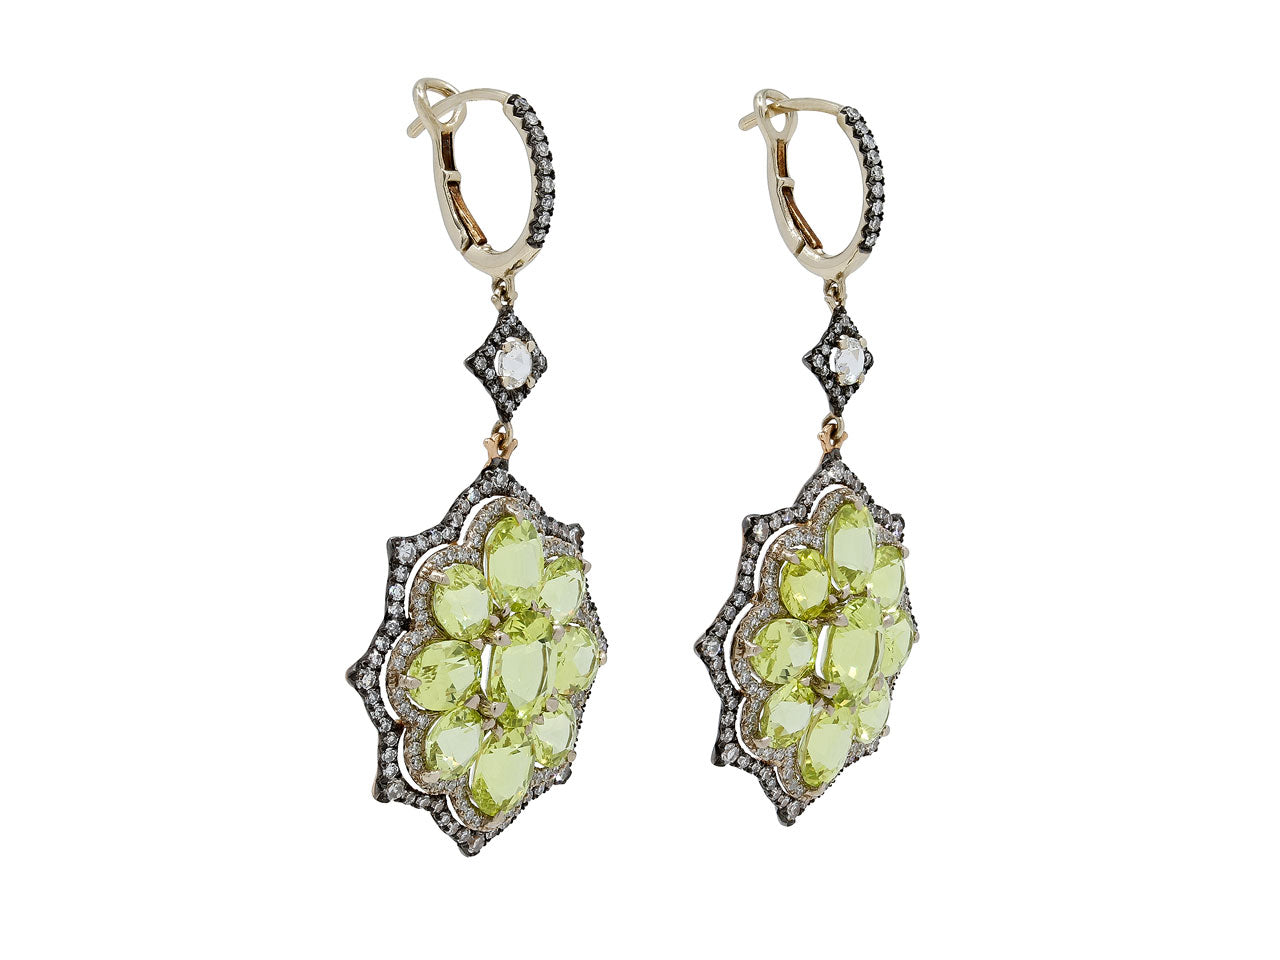 IVY Chrysoberyl and Diamond Earrings in 18K Rose Gold